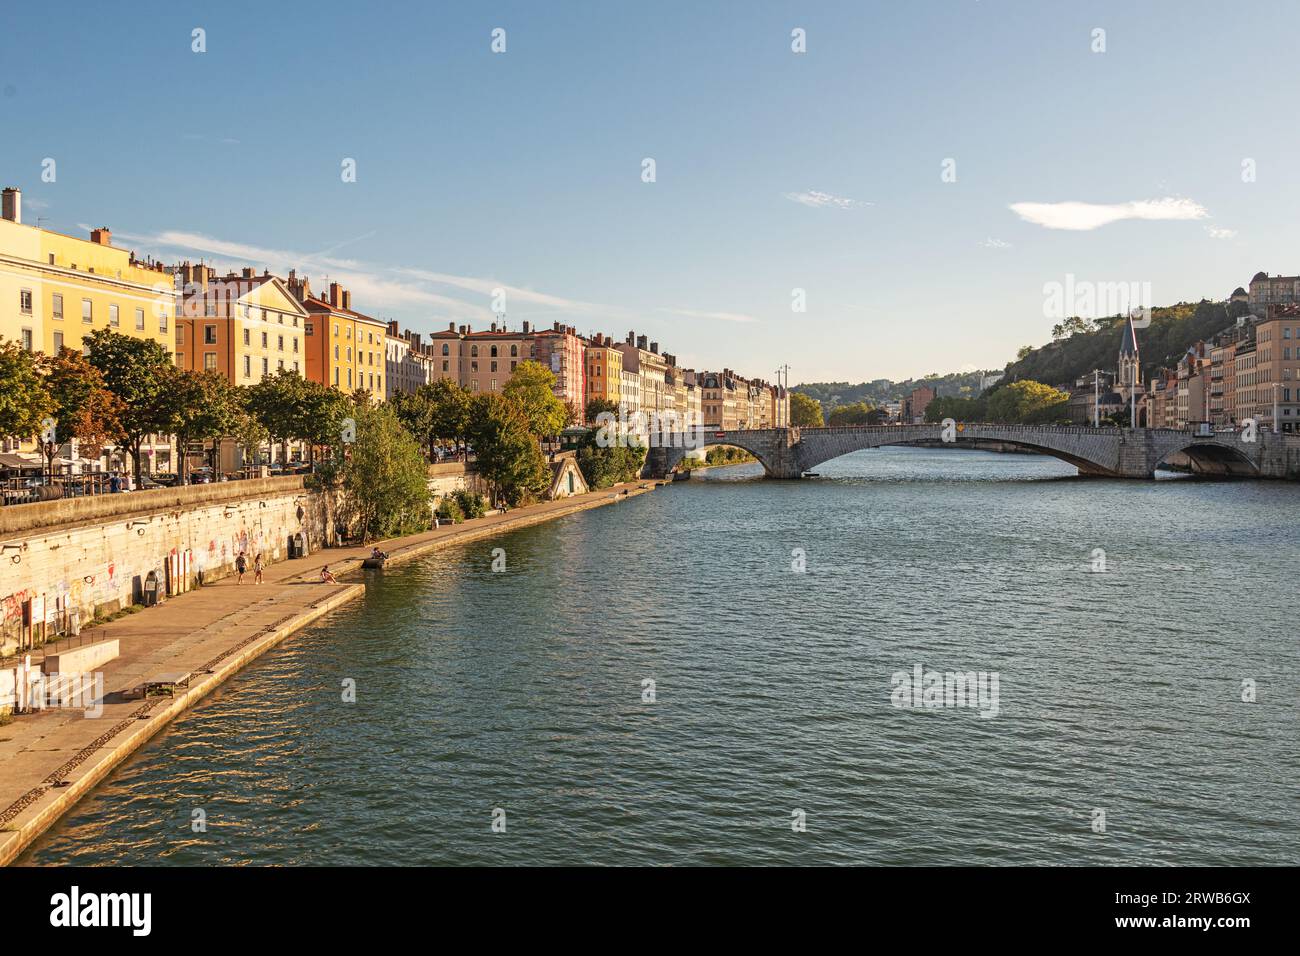 Pont Bonaparte spanning the River Saone in Lyon France. Stock Photo